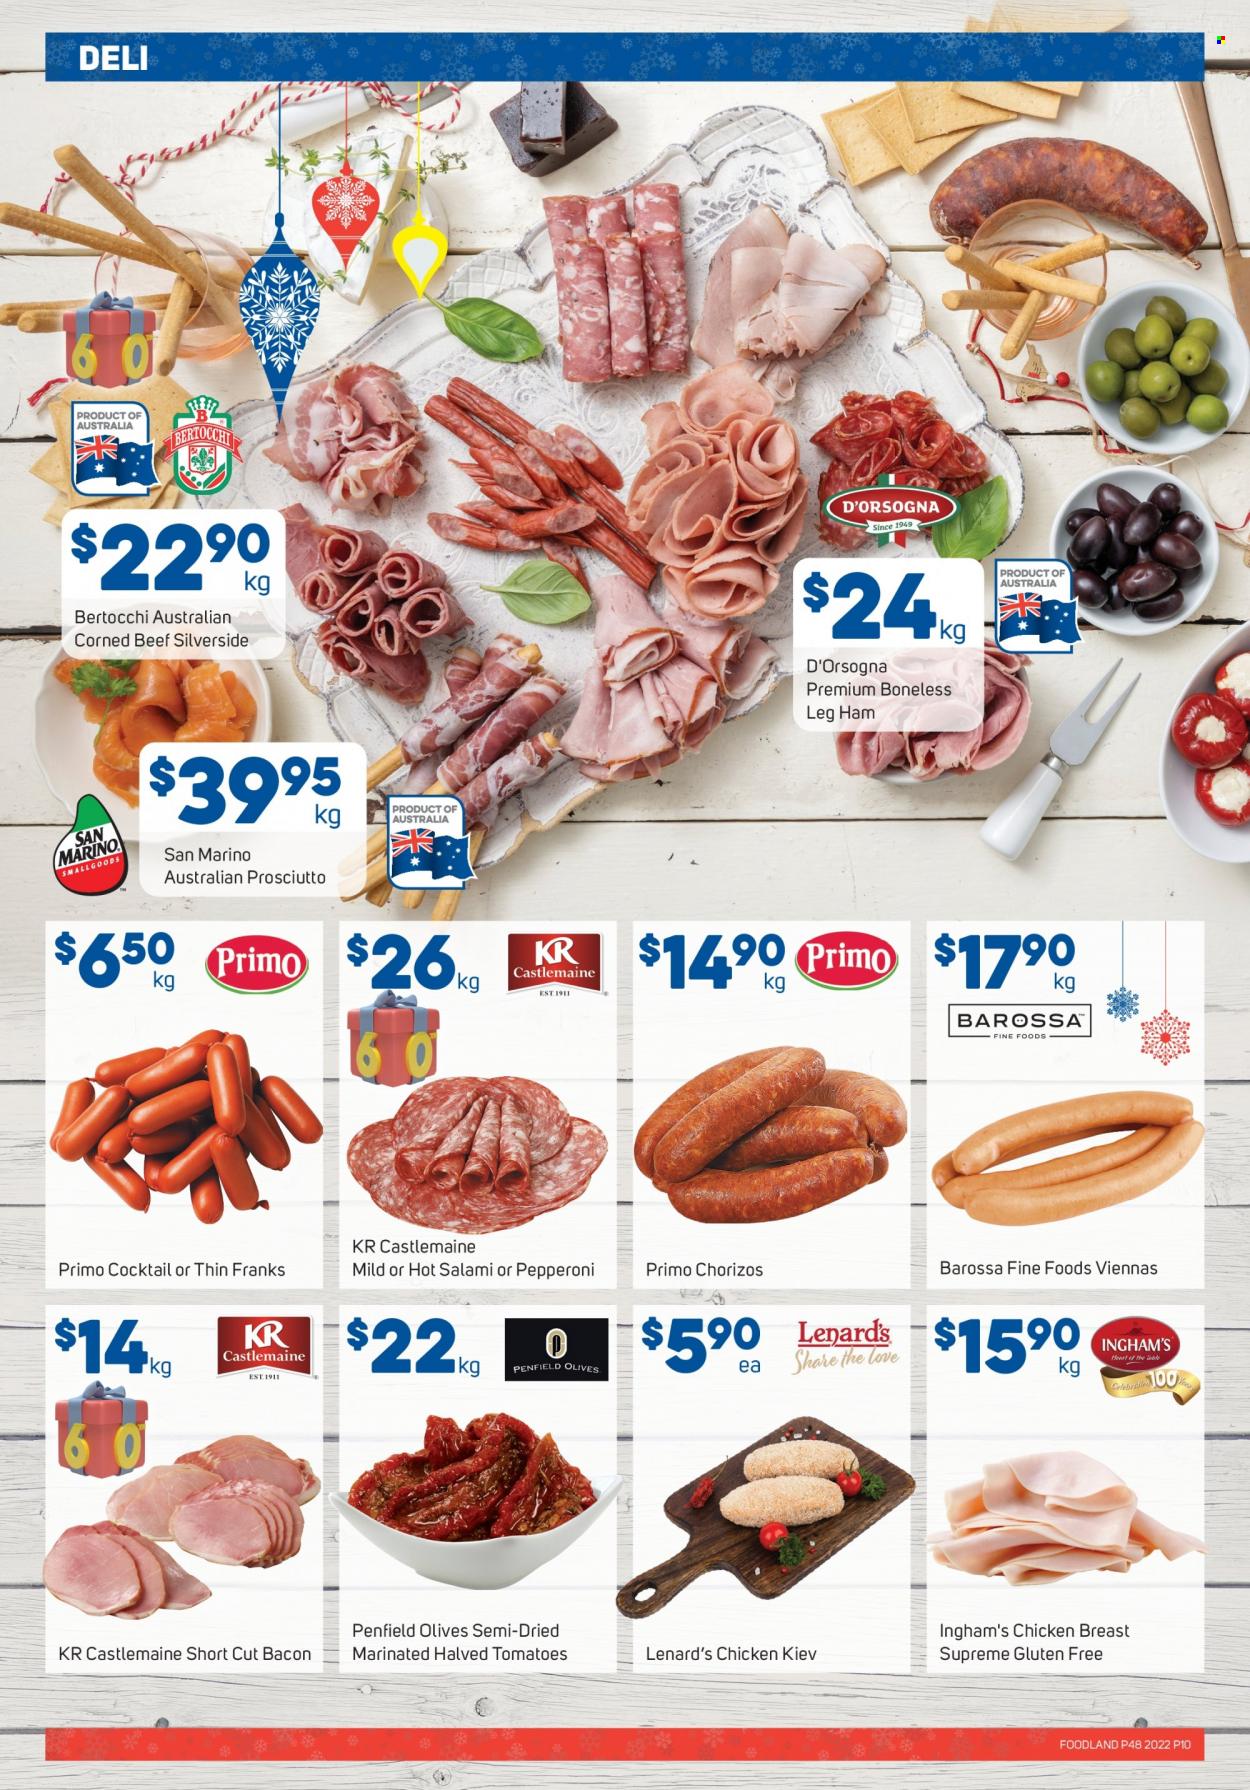 thumbnail - Foodland Catalogue - 30 Nov 2022 - 6 Dec 2022 - Sales products - tomatoes, bacon, salami, ham, prosciutto, vienna sausage, pepperoni, corned beef, leg ham, Chicken Kiev, Celebration, olives, chicken breasts, beef meat. Page 10.